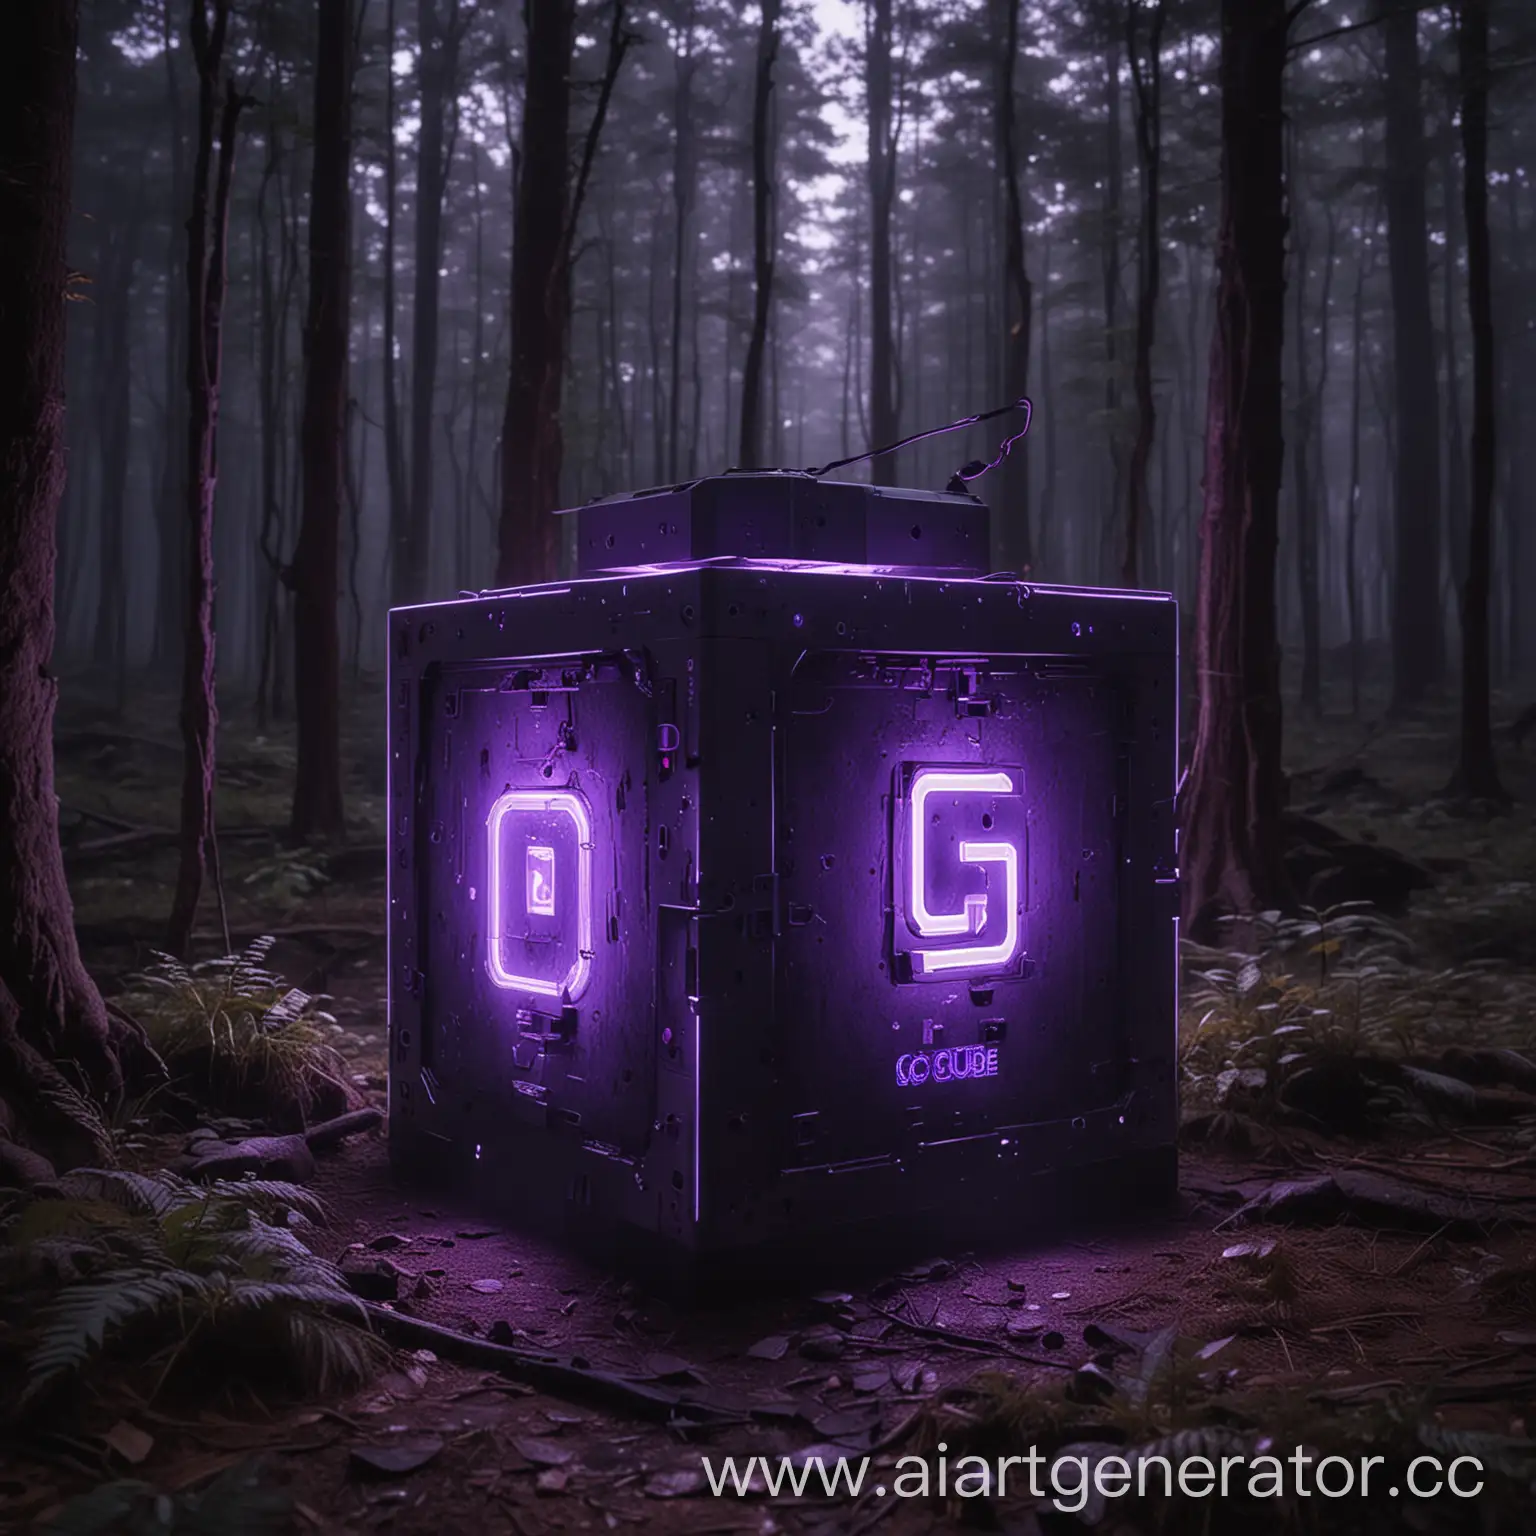 In the forest, the cube glows purple and inside the part of the computer and the cube is labeled CG and on one side there is a joystick and a monitor at the top